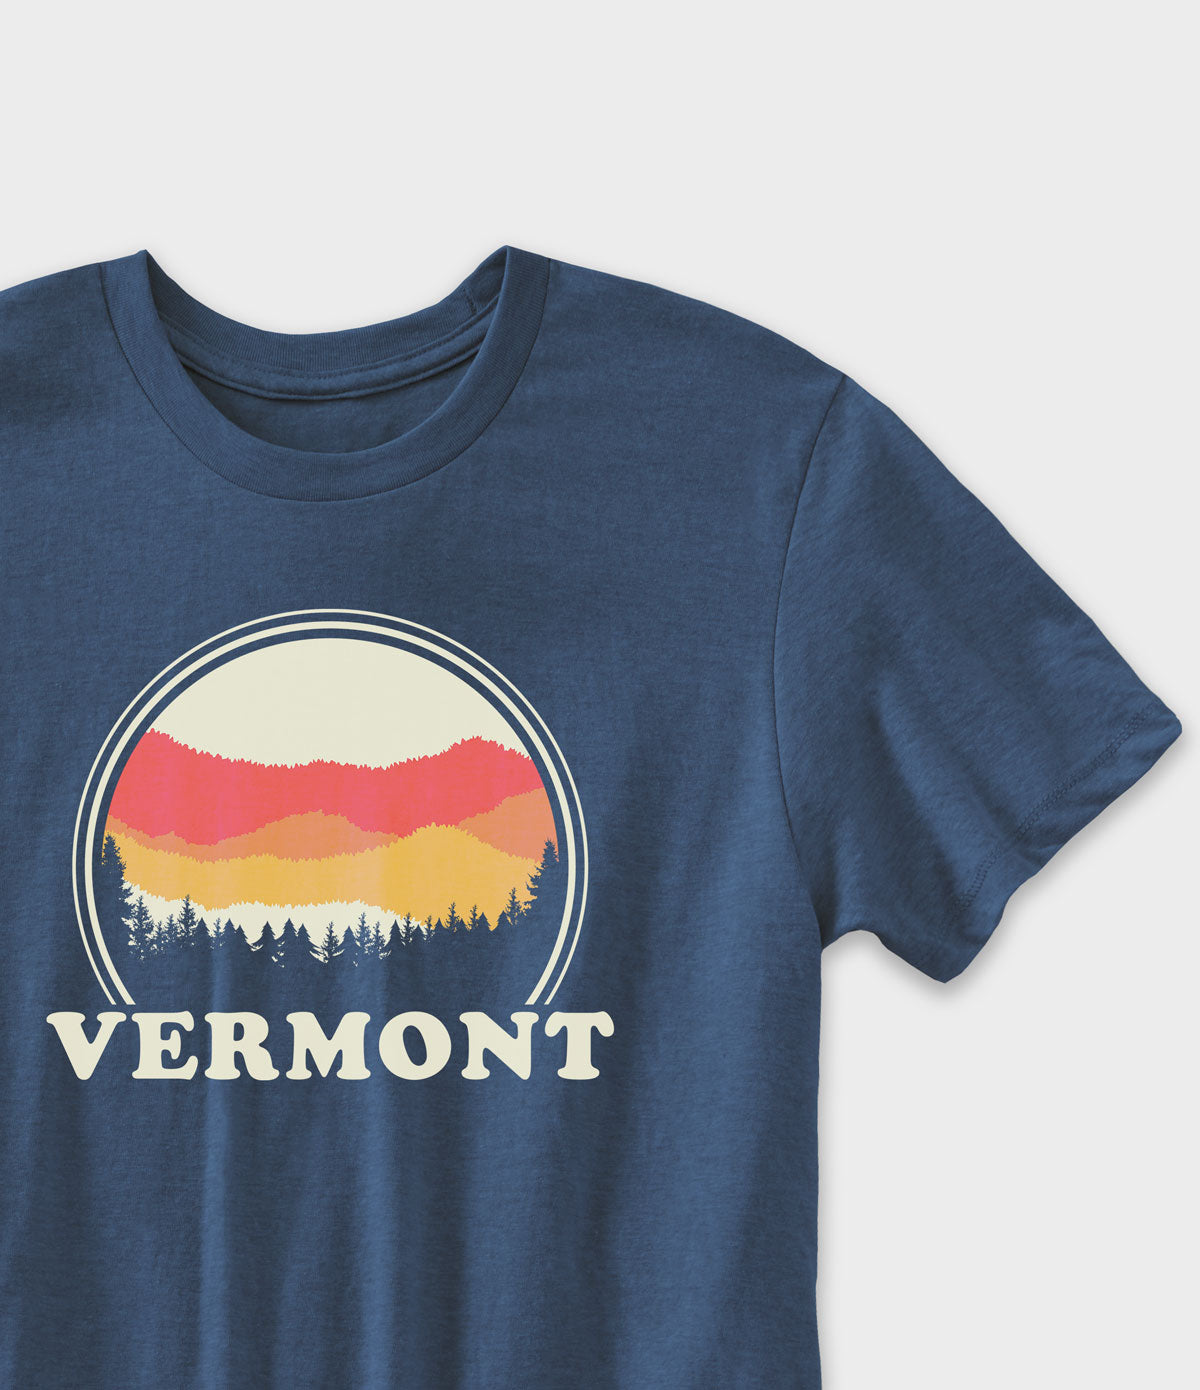 Vermont Mountains Graphic T-Shirt